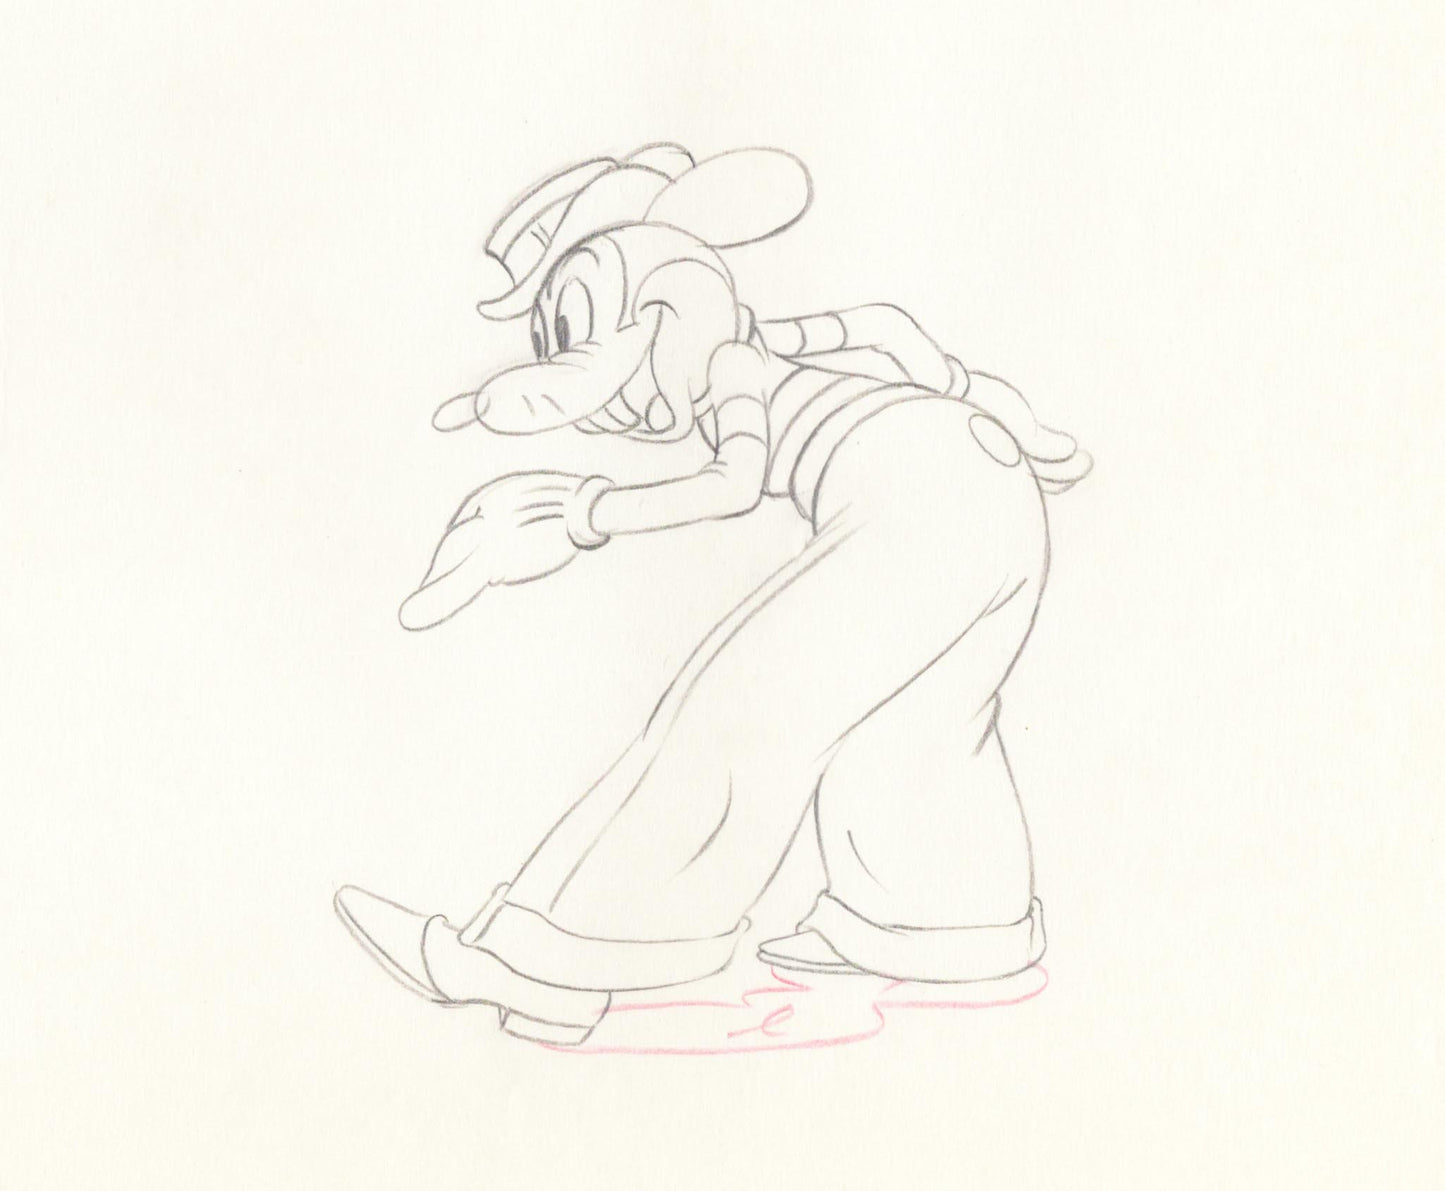 1936 Mortimer Mouse Original Production Animation Cel Drawing from Disney Mickeys Rival 162